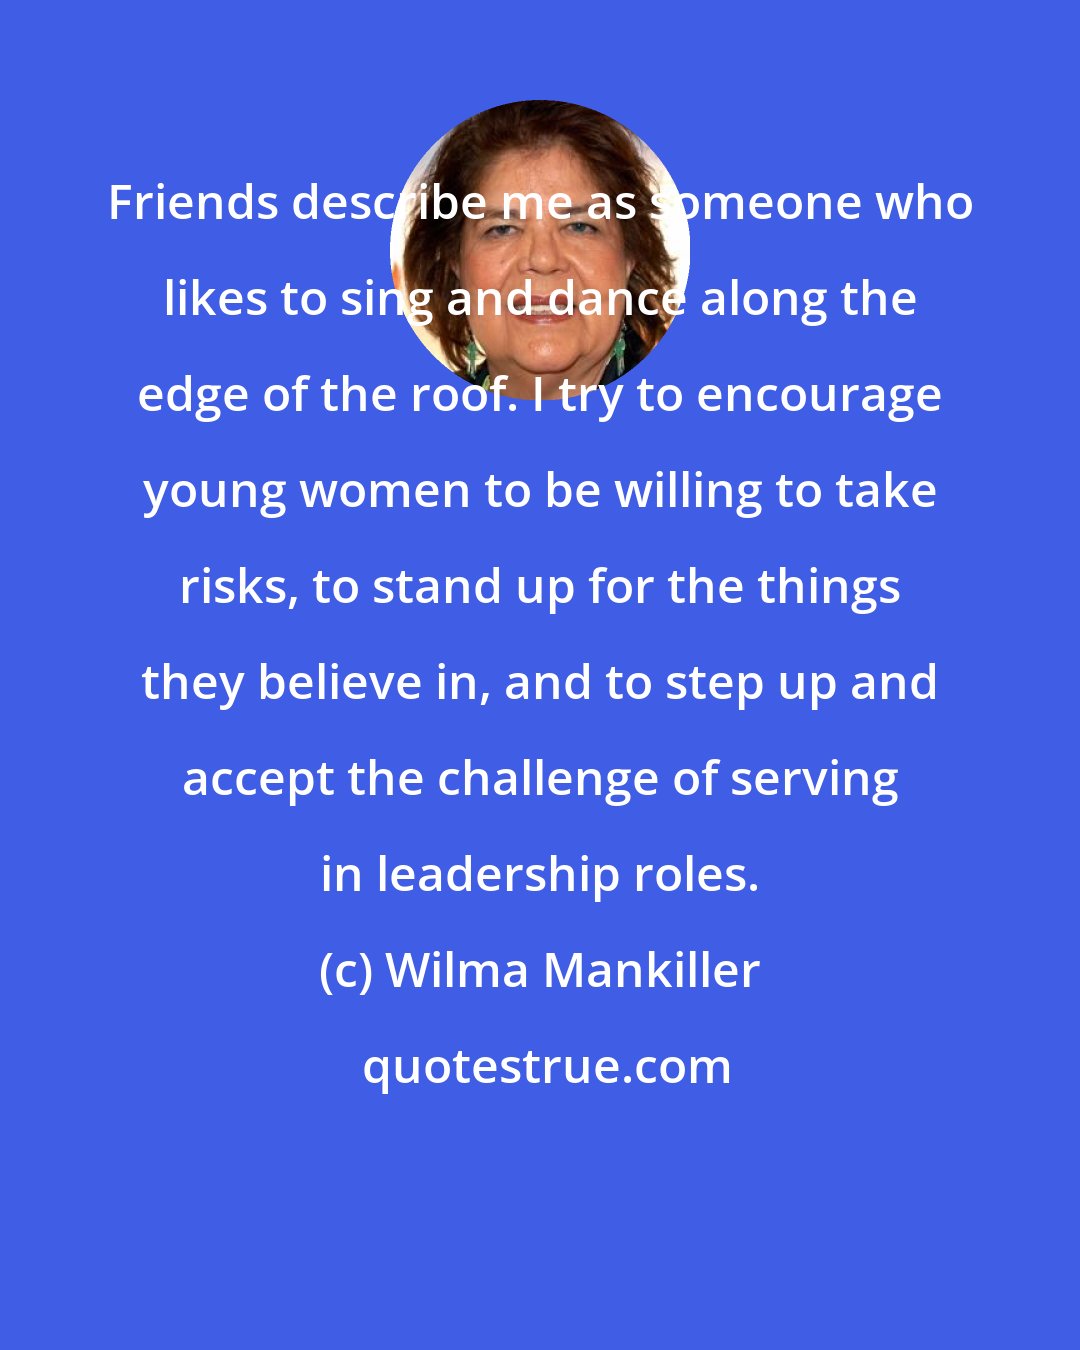 Wilma Mankiller: Friends describe me as someone who likes to sing and dance along the edge of the roof. I try to encourage young women to be willing to take risks, to stand up for the things they believe in, and to step up and accept the challenge of serving in leadership roles.